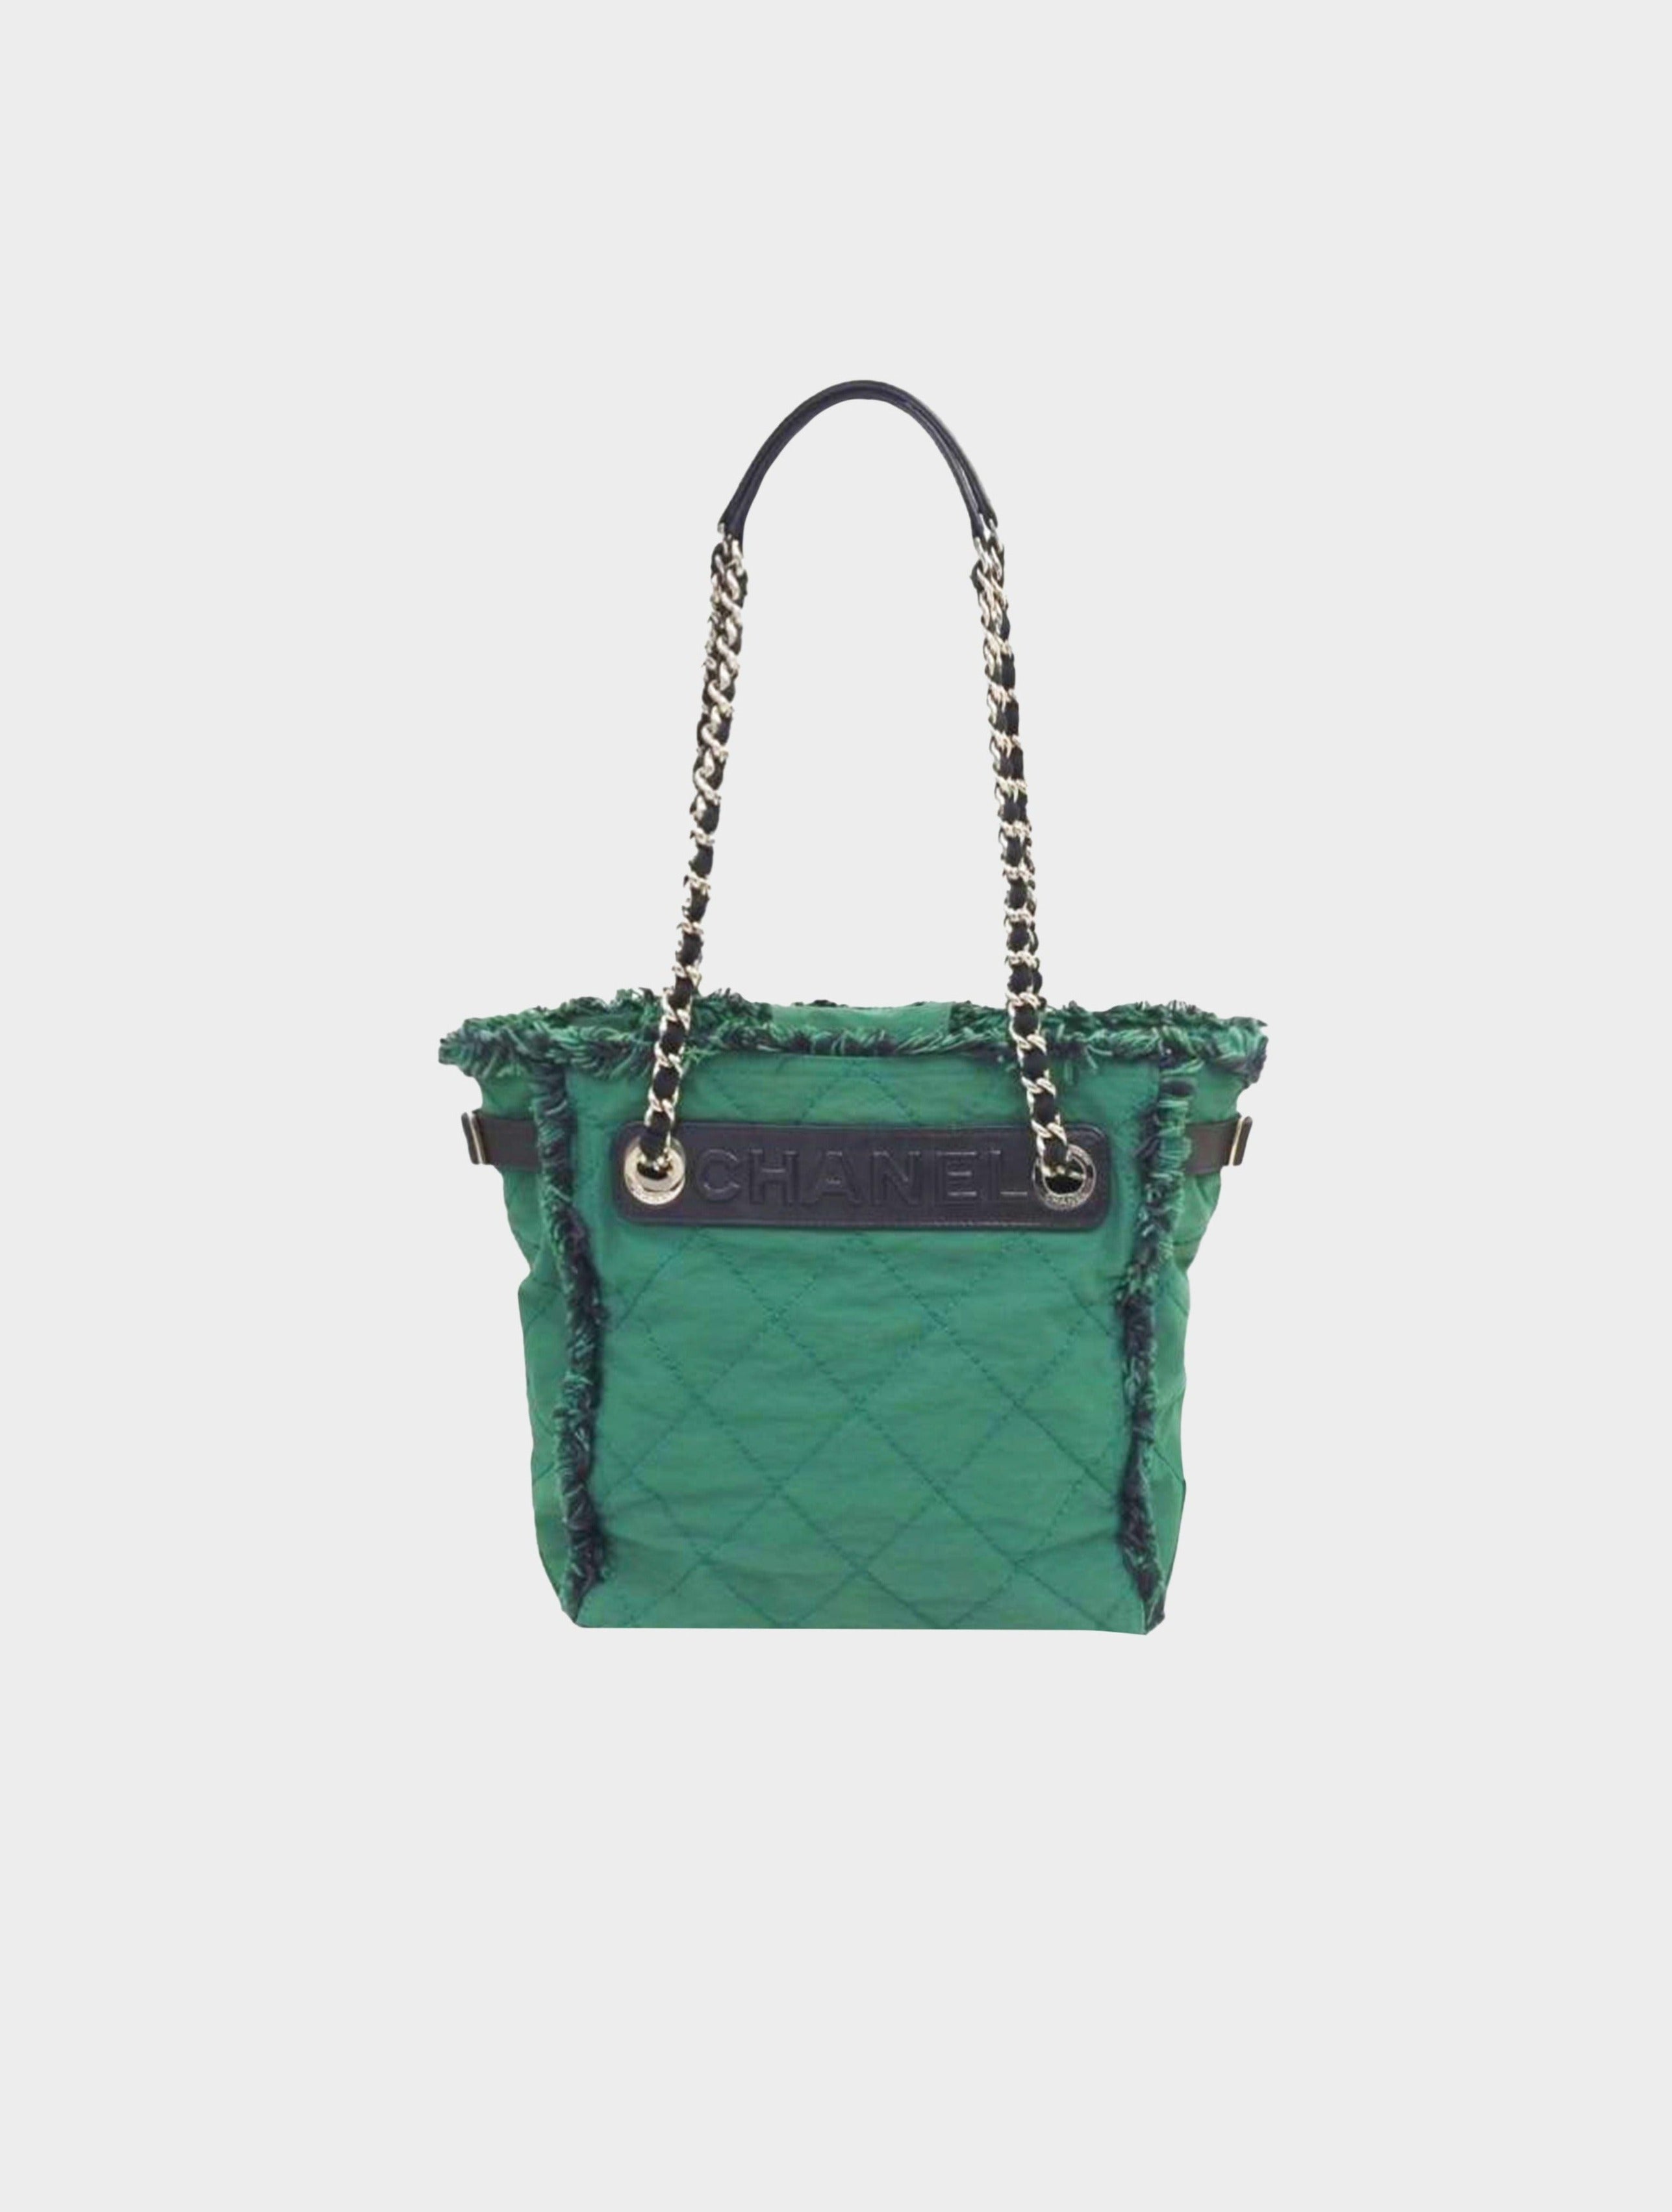 Chanel 2013 Green Quilted Tote Bag